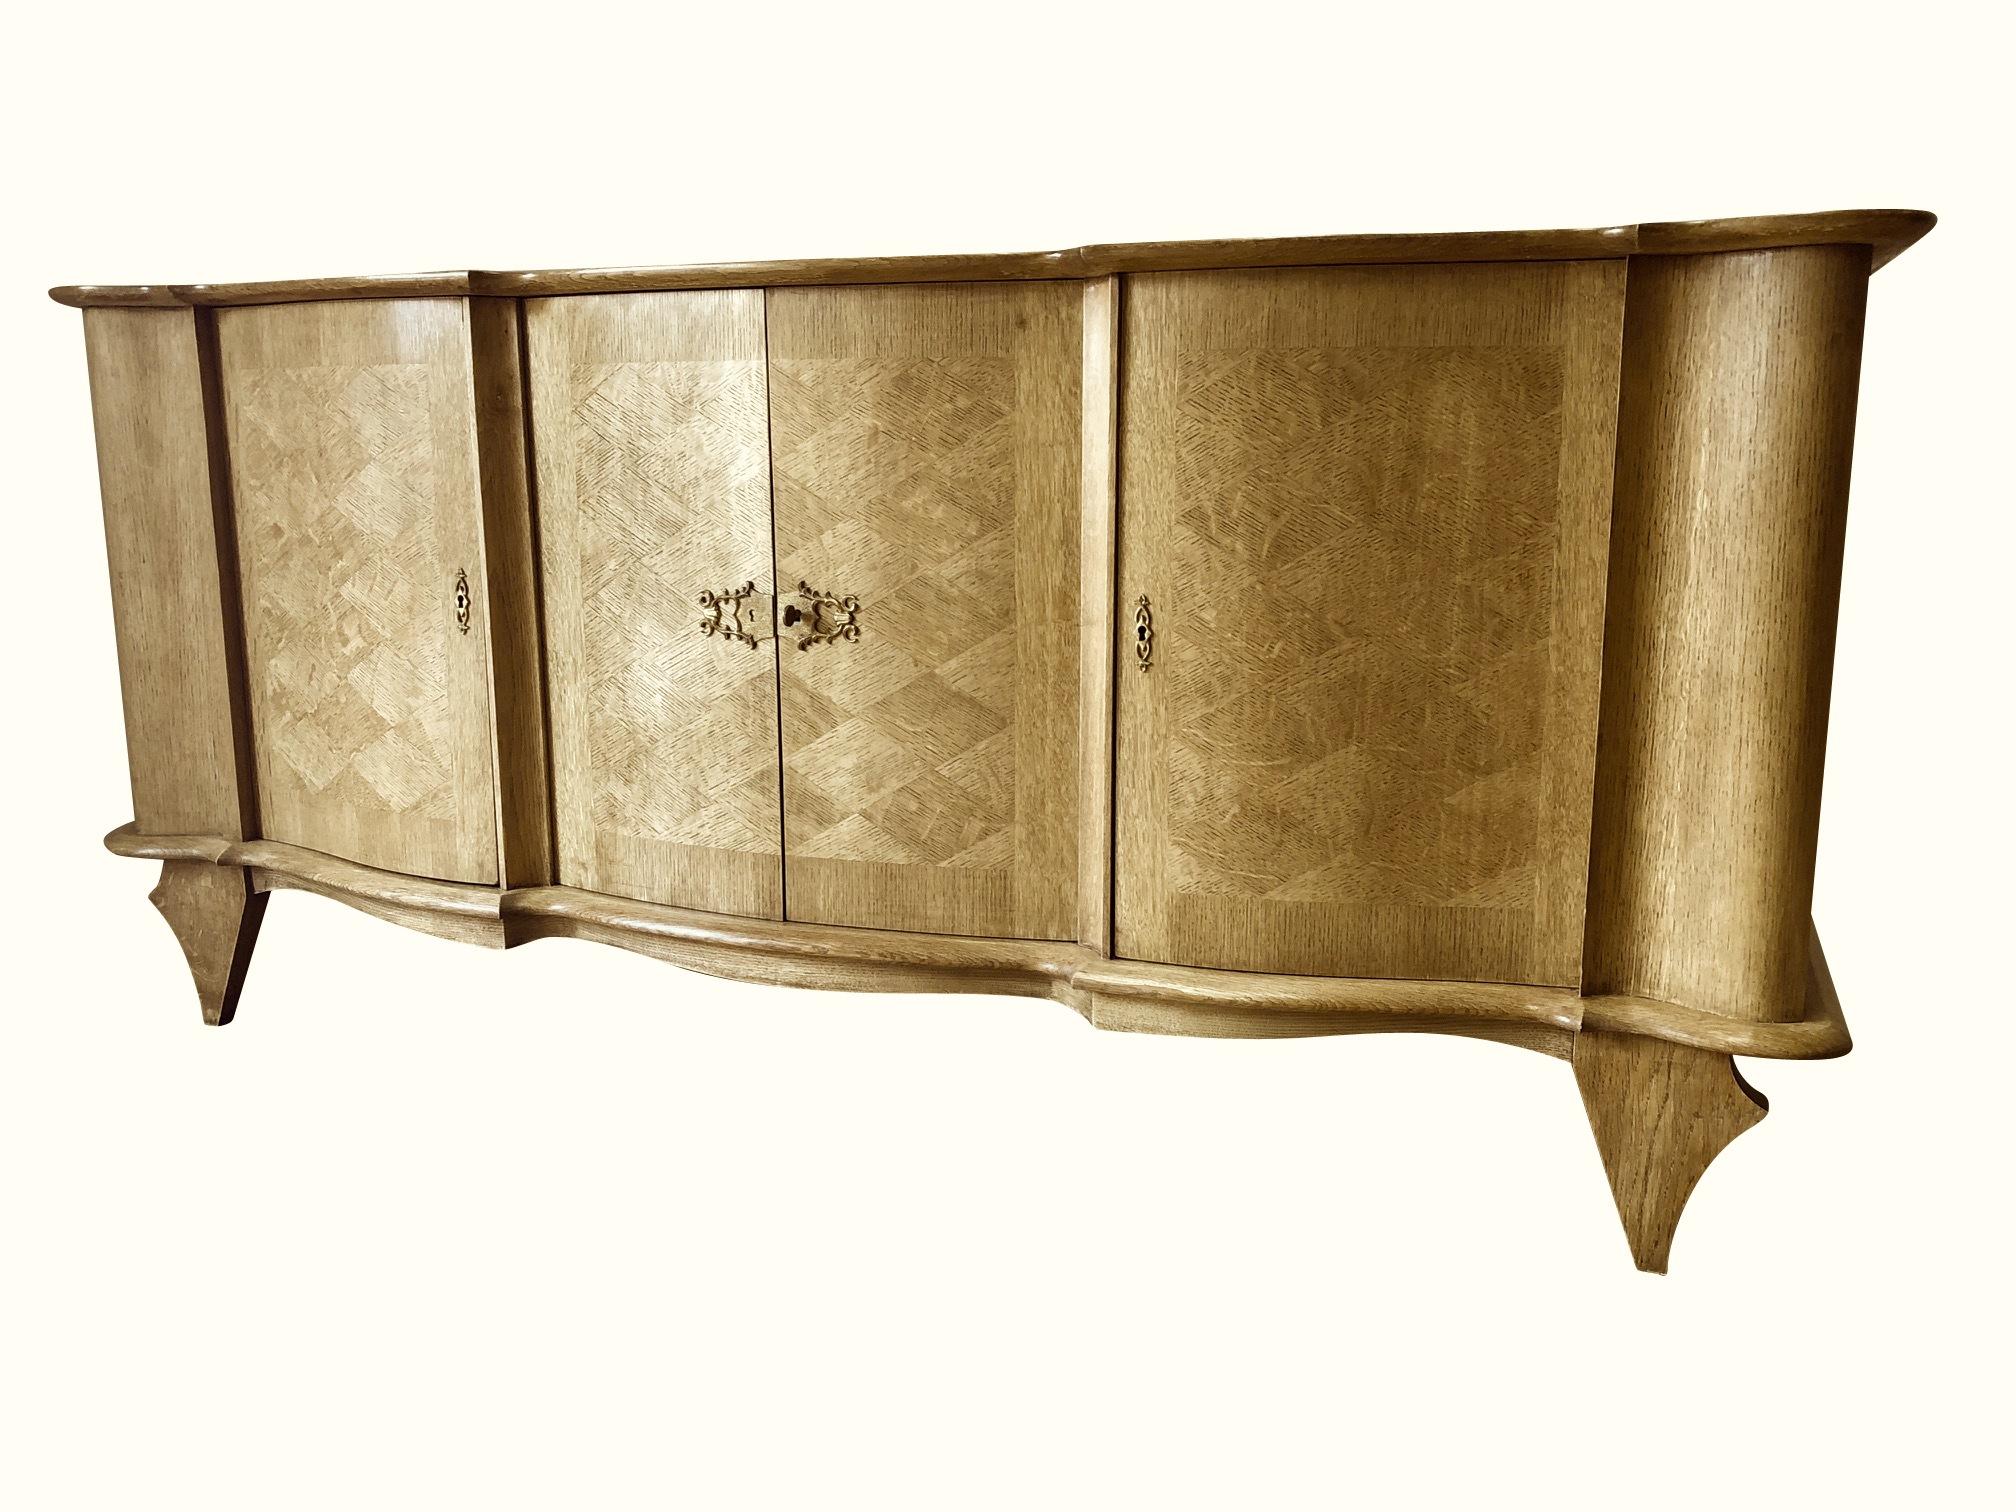 1940s French signed Jules Leleu oak credenza.
Diamond pattern parquetry veneer on doors and top.
Curved facade with four doors.
Sculptural legs.
Original ornate brass hardware.
Three interior shelves and two drawers.
 